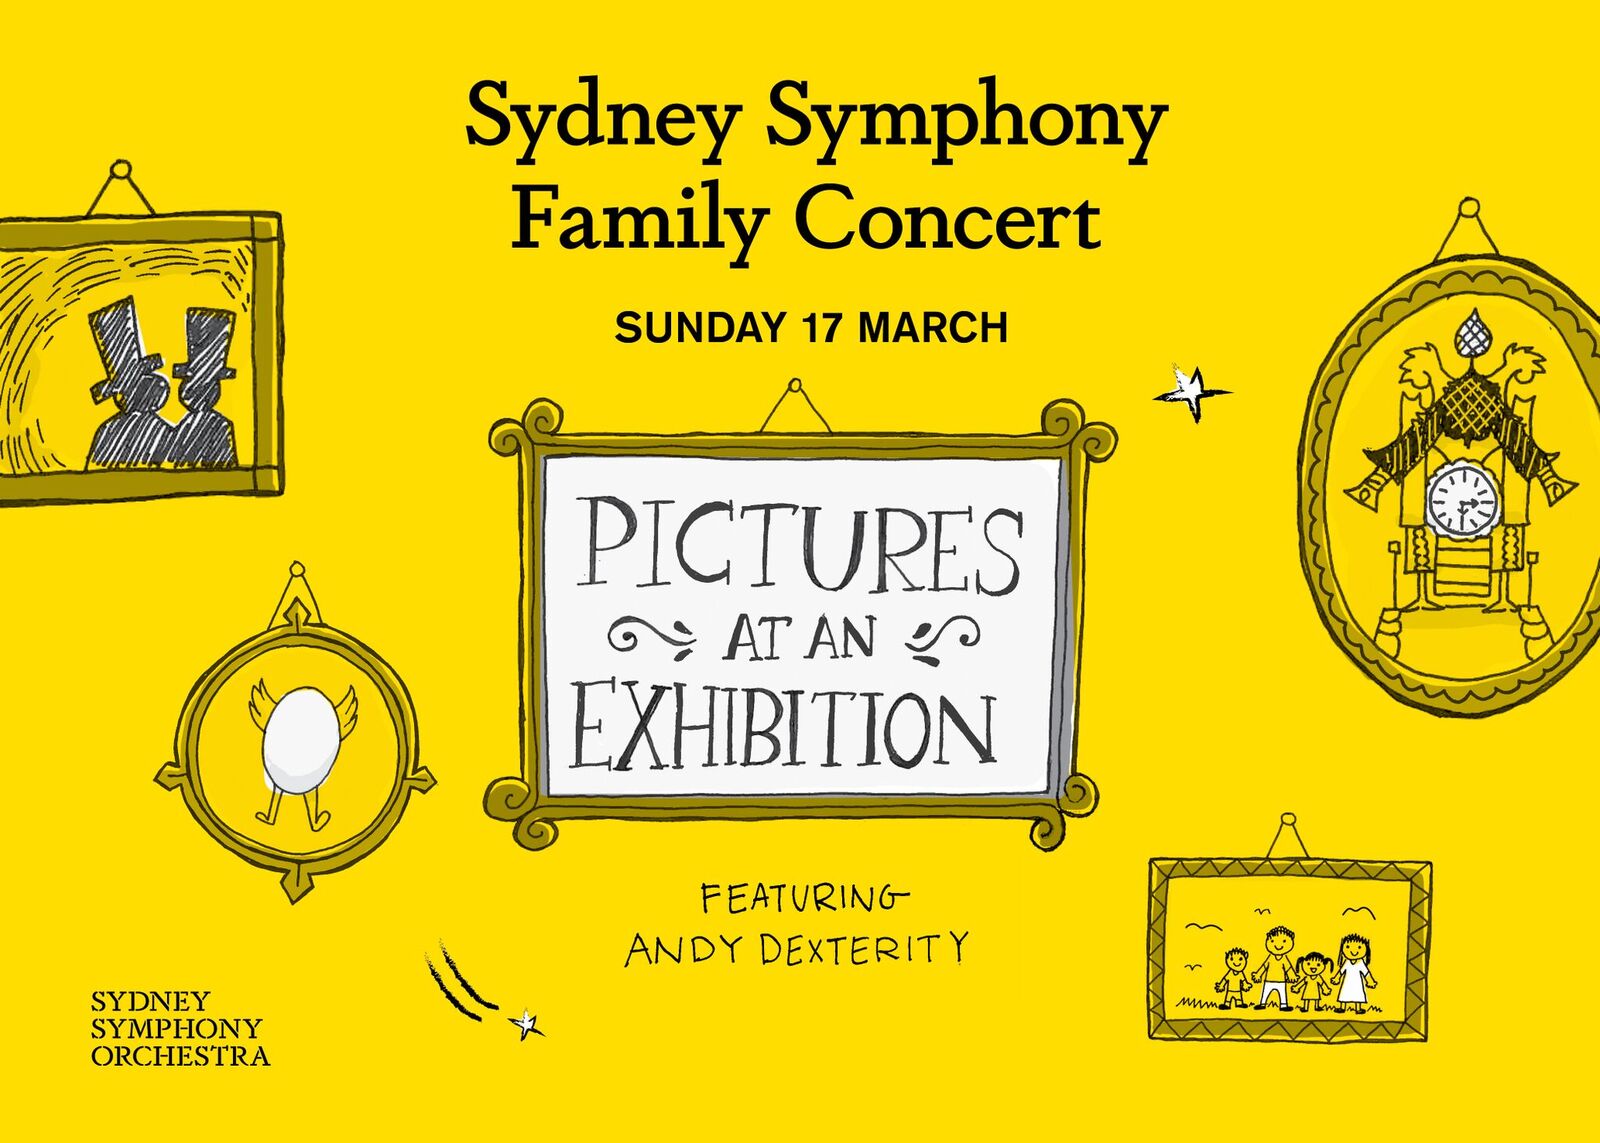 Sydney Symphony Family Concert Opener Presents Pictures At An Exhibition In Music And Mime